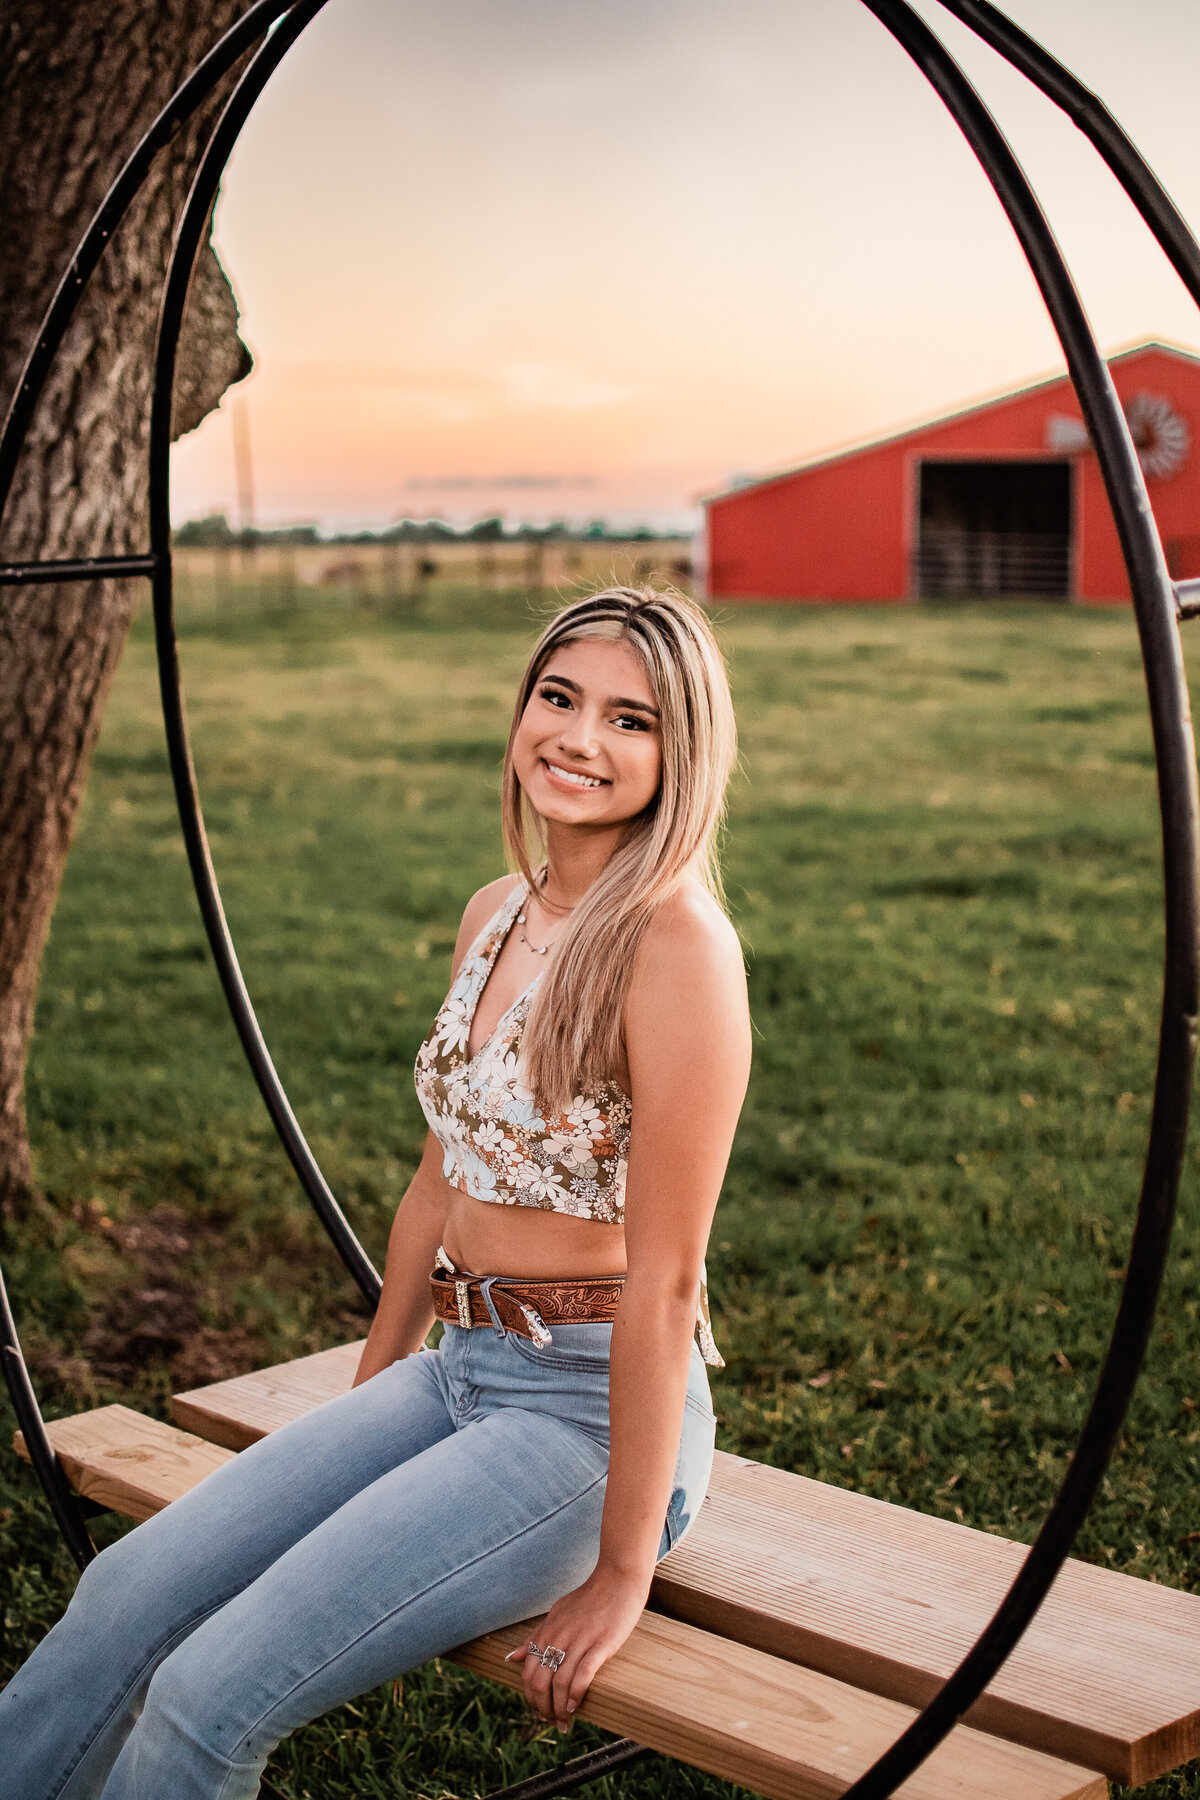 A senior wearing a floral halter top sits on a circular swing in front of a red barn.